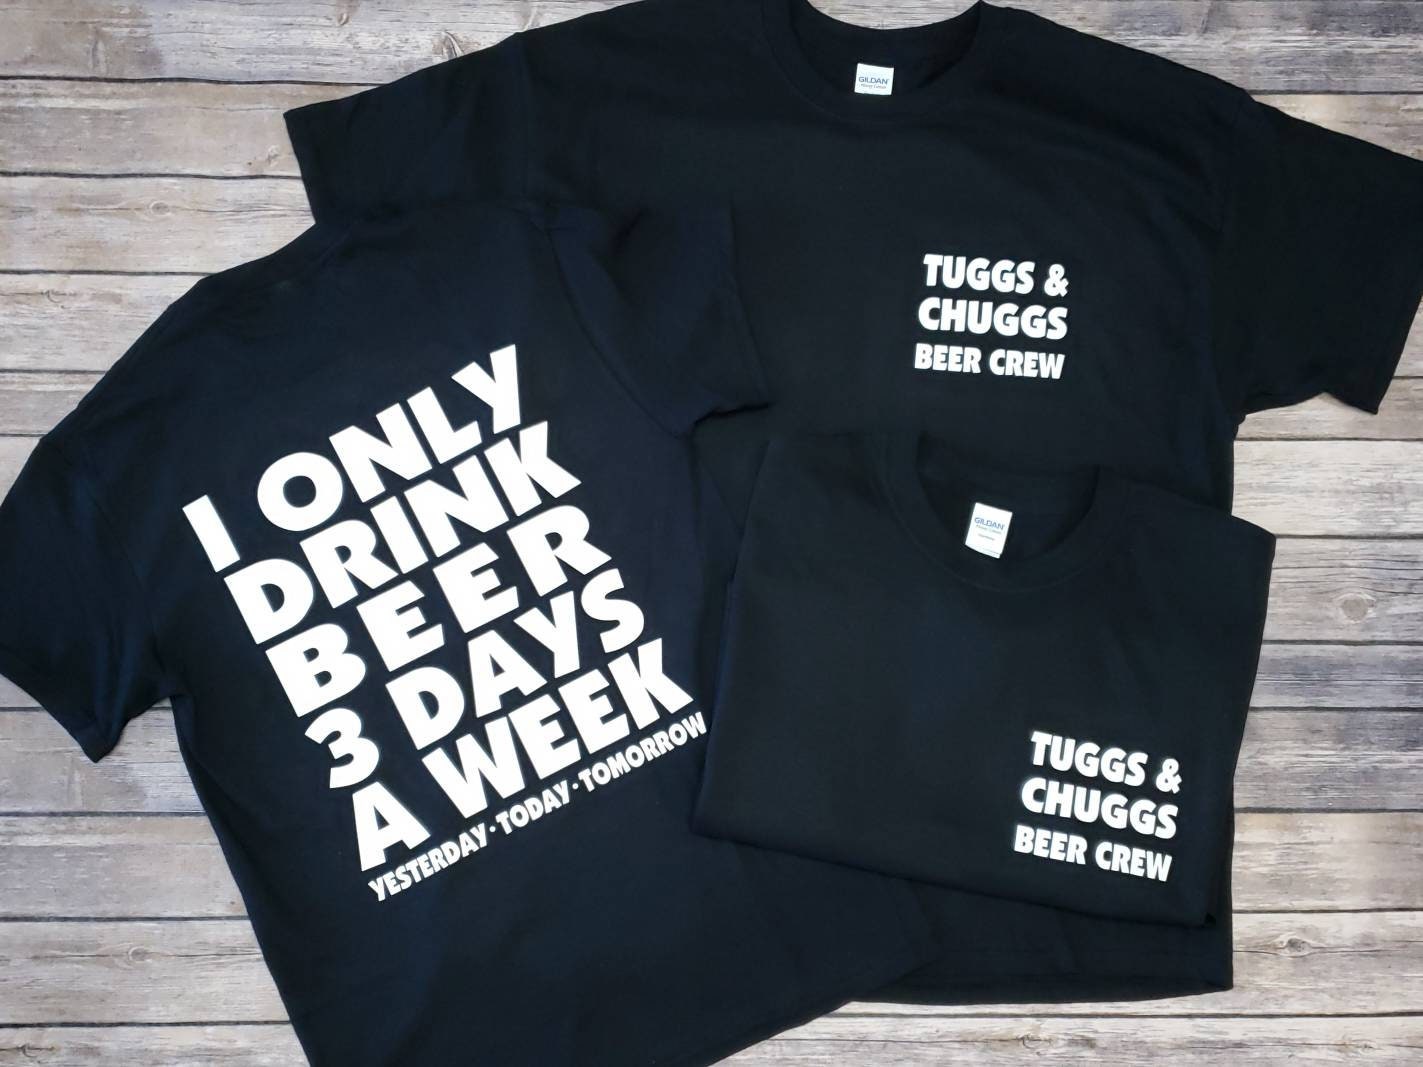 I Only Drink Beer 3 Days a Week - Yesterday Today Tomorrow - Guys Beer Drinking Team Shirts